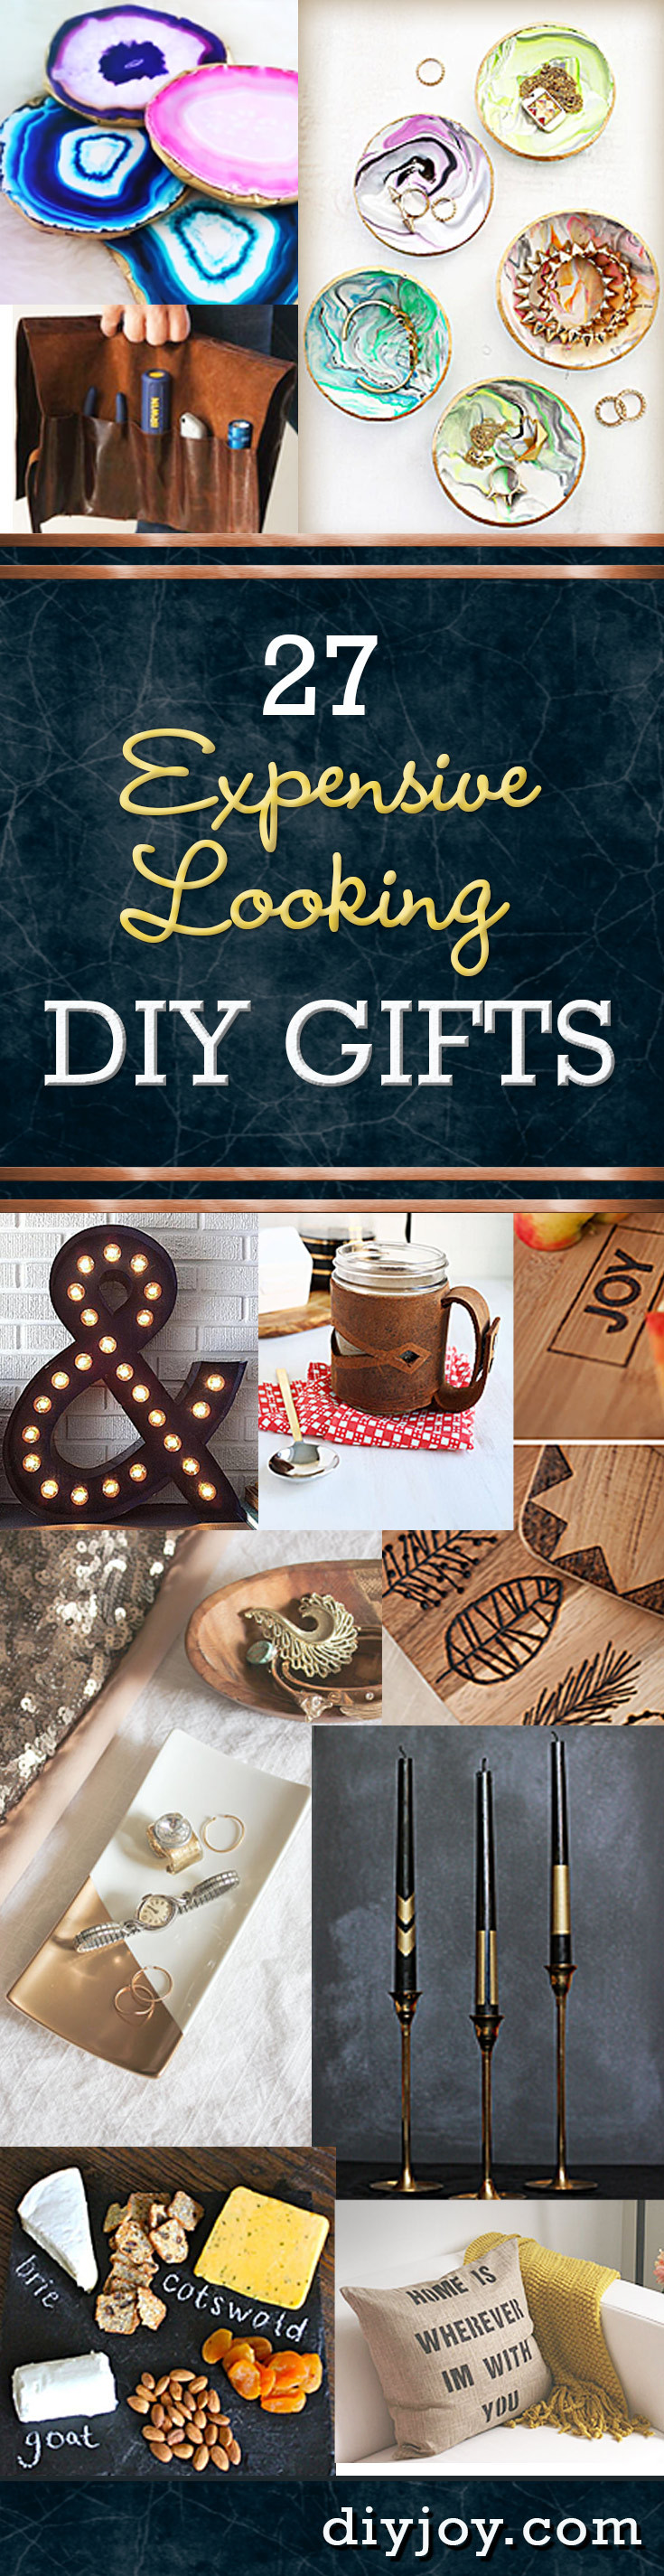 Cheap DIY Gifts
 27 Expensive Looking Inexpensive DIY Gifts